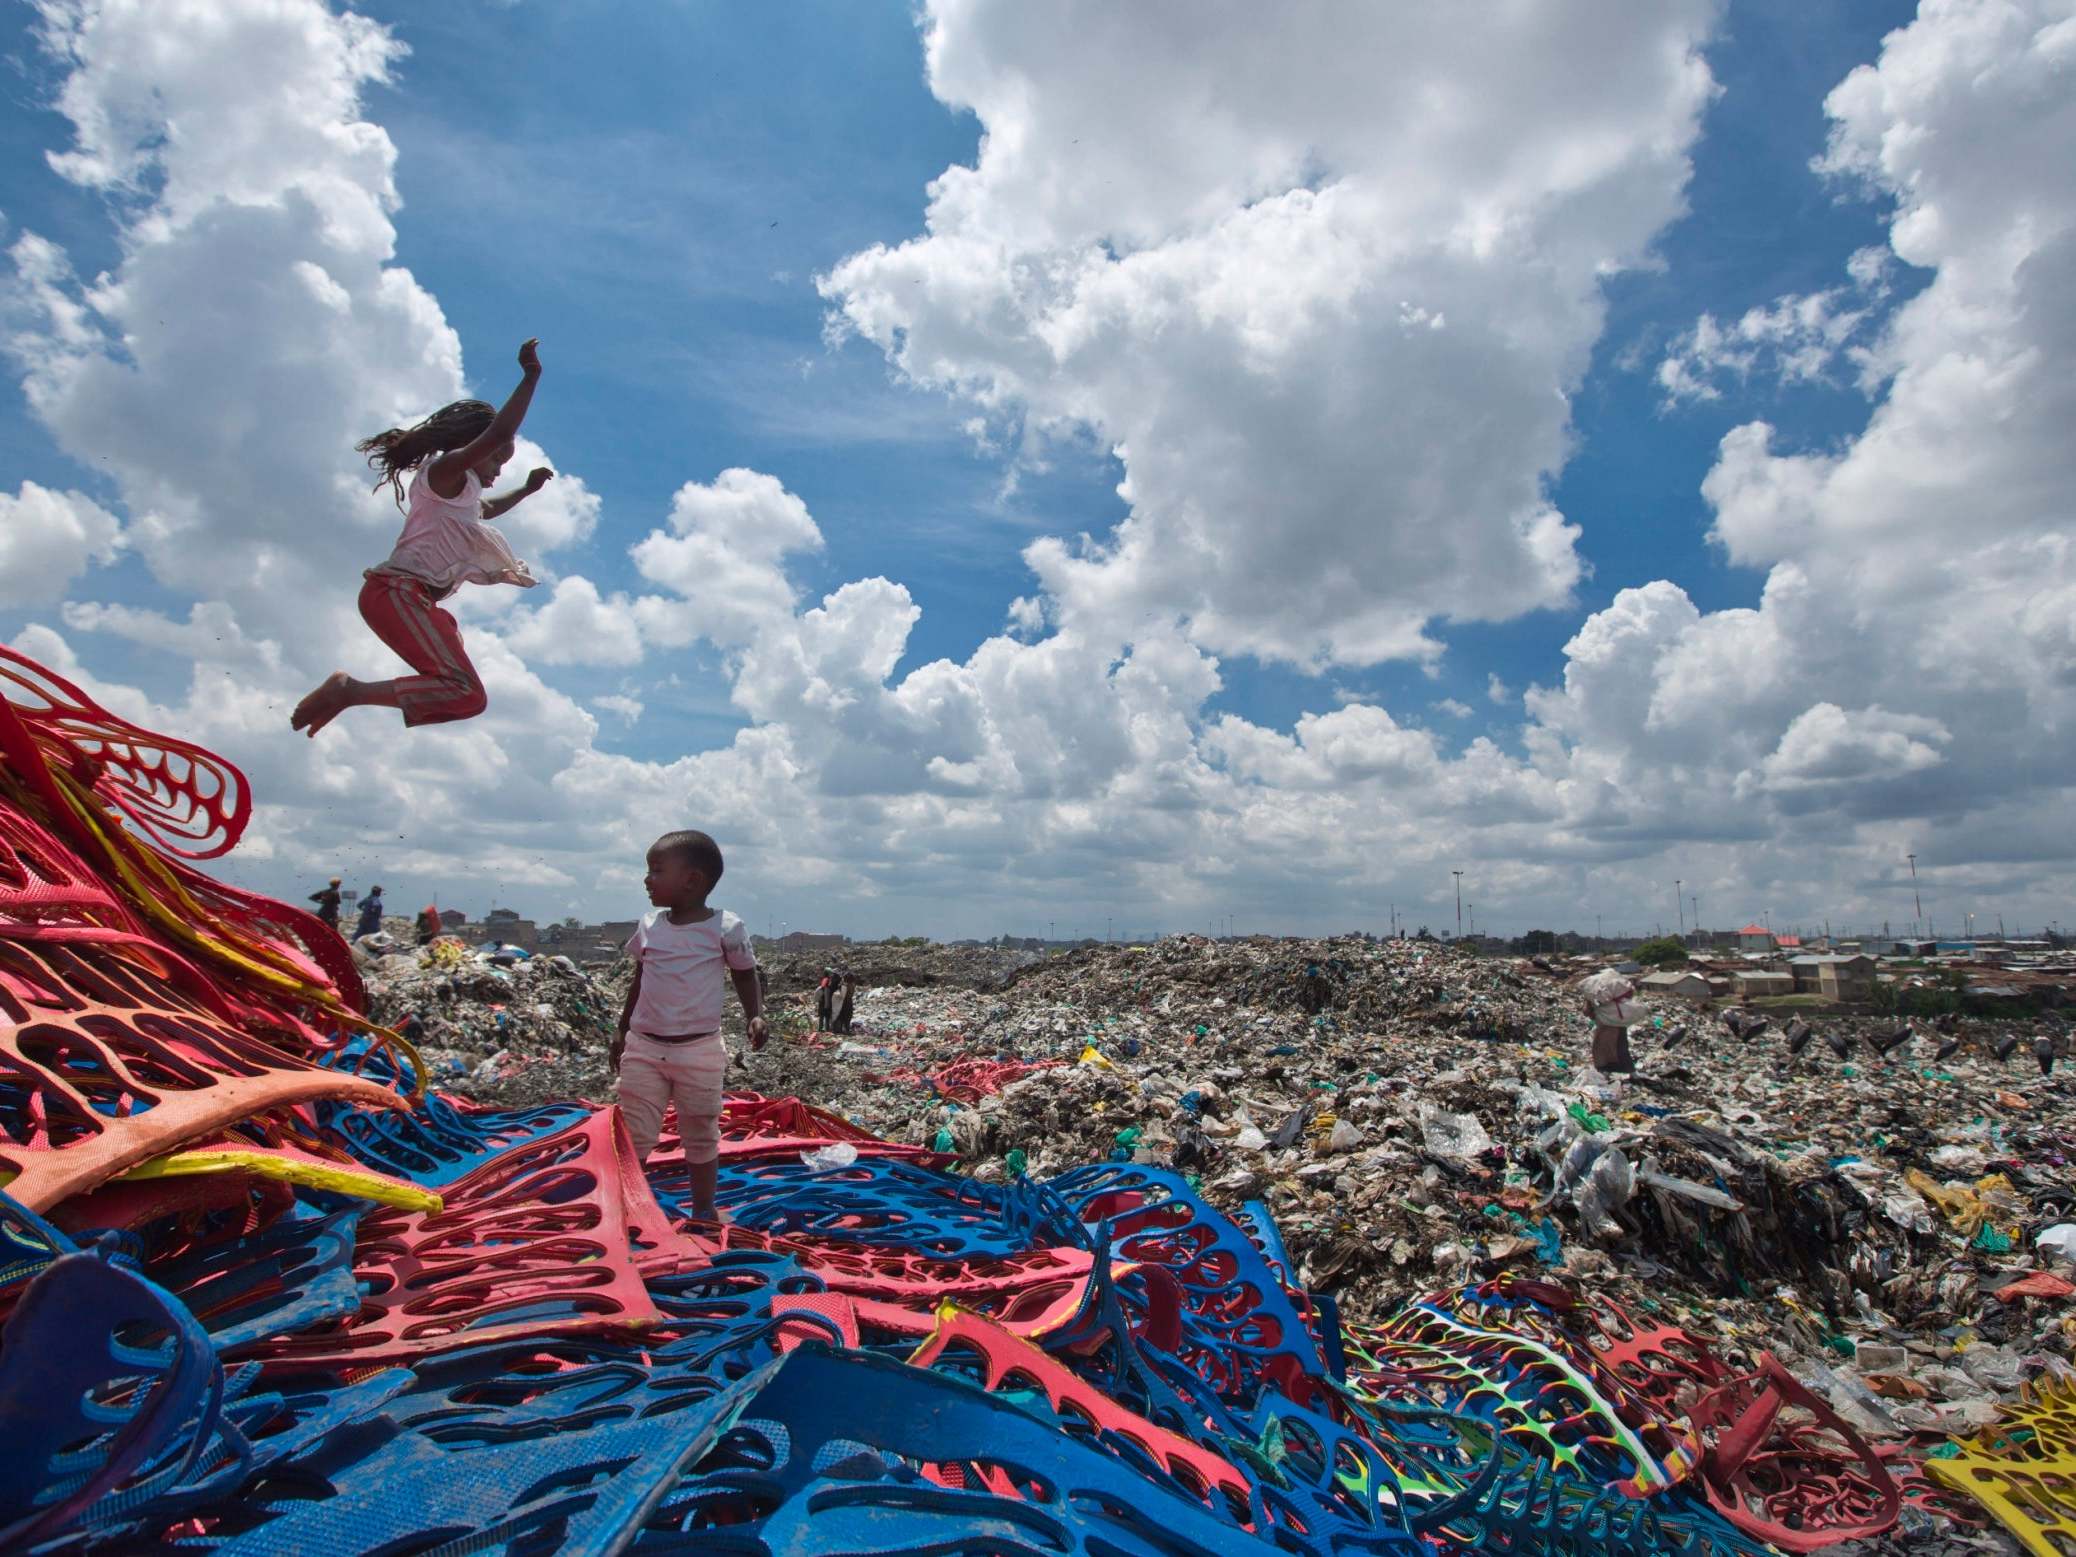 Two children play on a plastic dump in the Dandora slum of Nairobi, Kenya, before a ban on plastic bags came into force in Kenya in 2017. The oil industry has recently asked the US to pressure Kenya to change its world-leading stance against the plastic waste that litters Africa, according to environmentalists